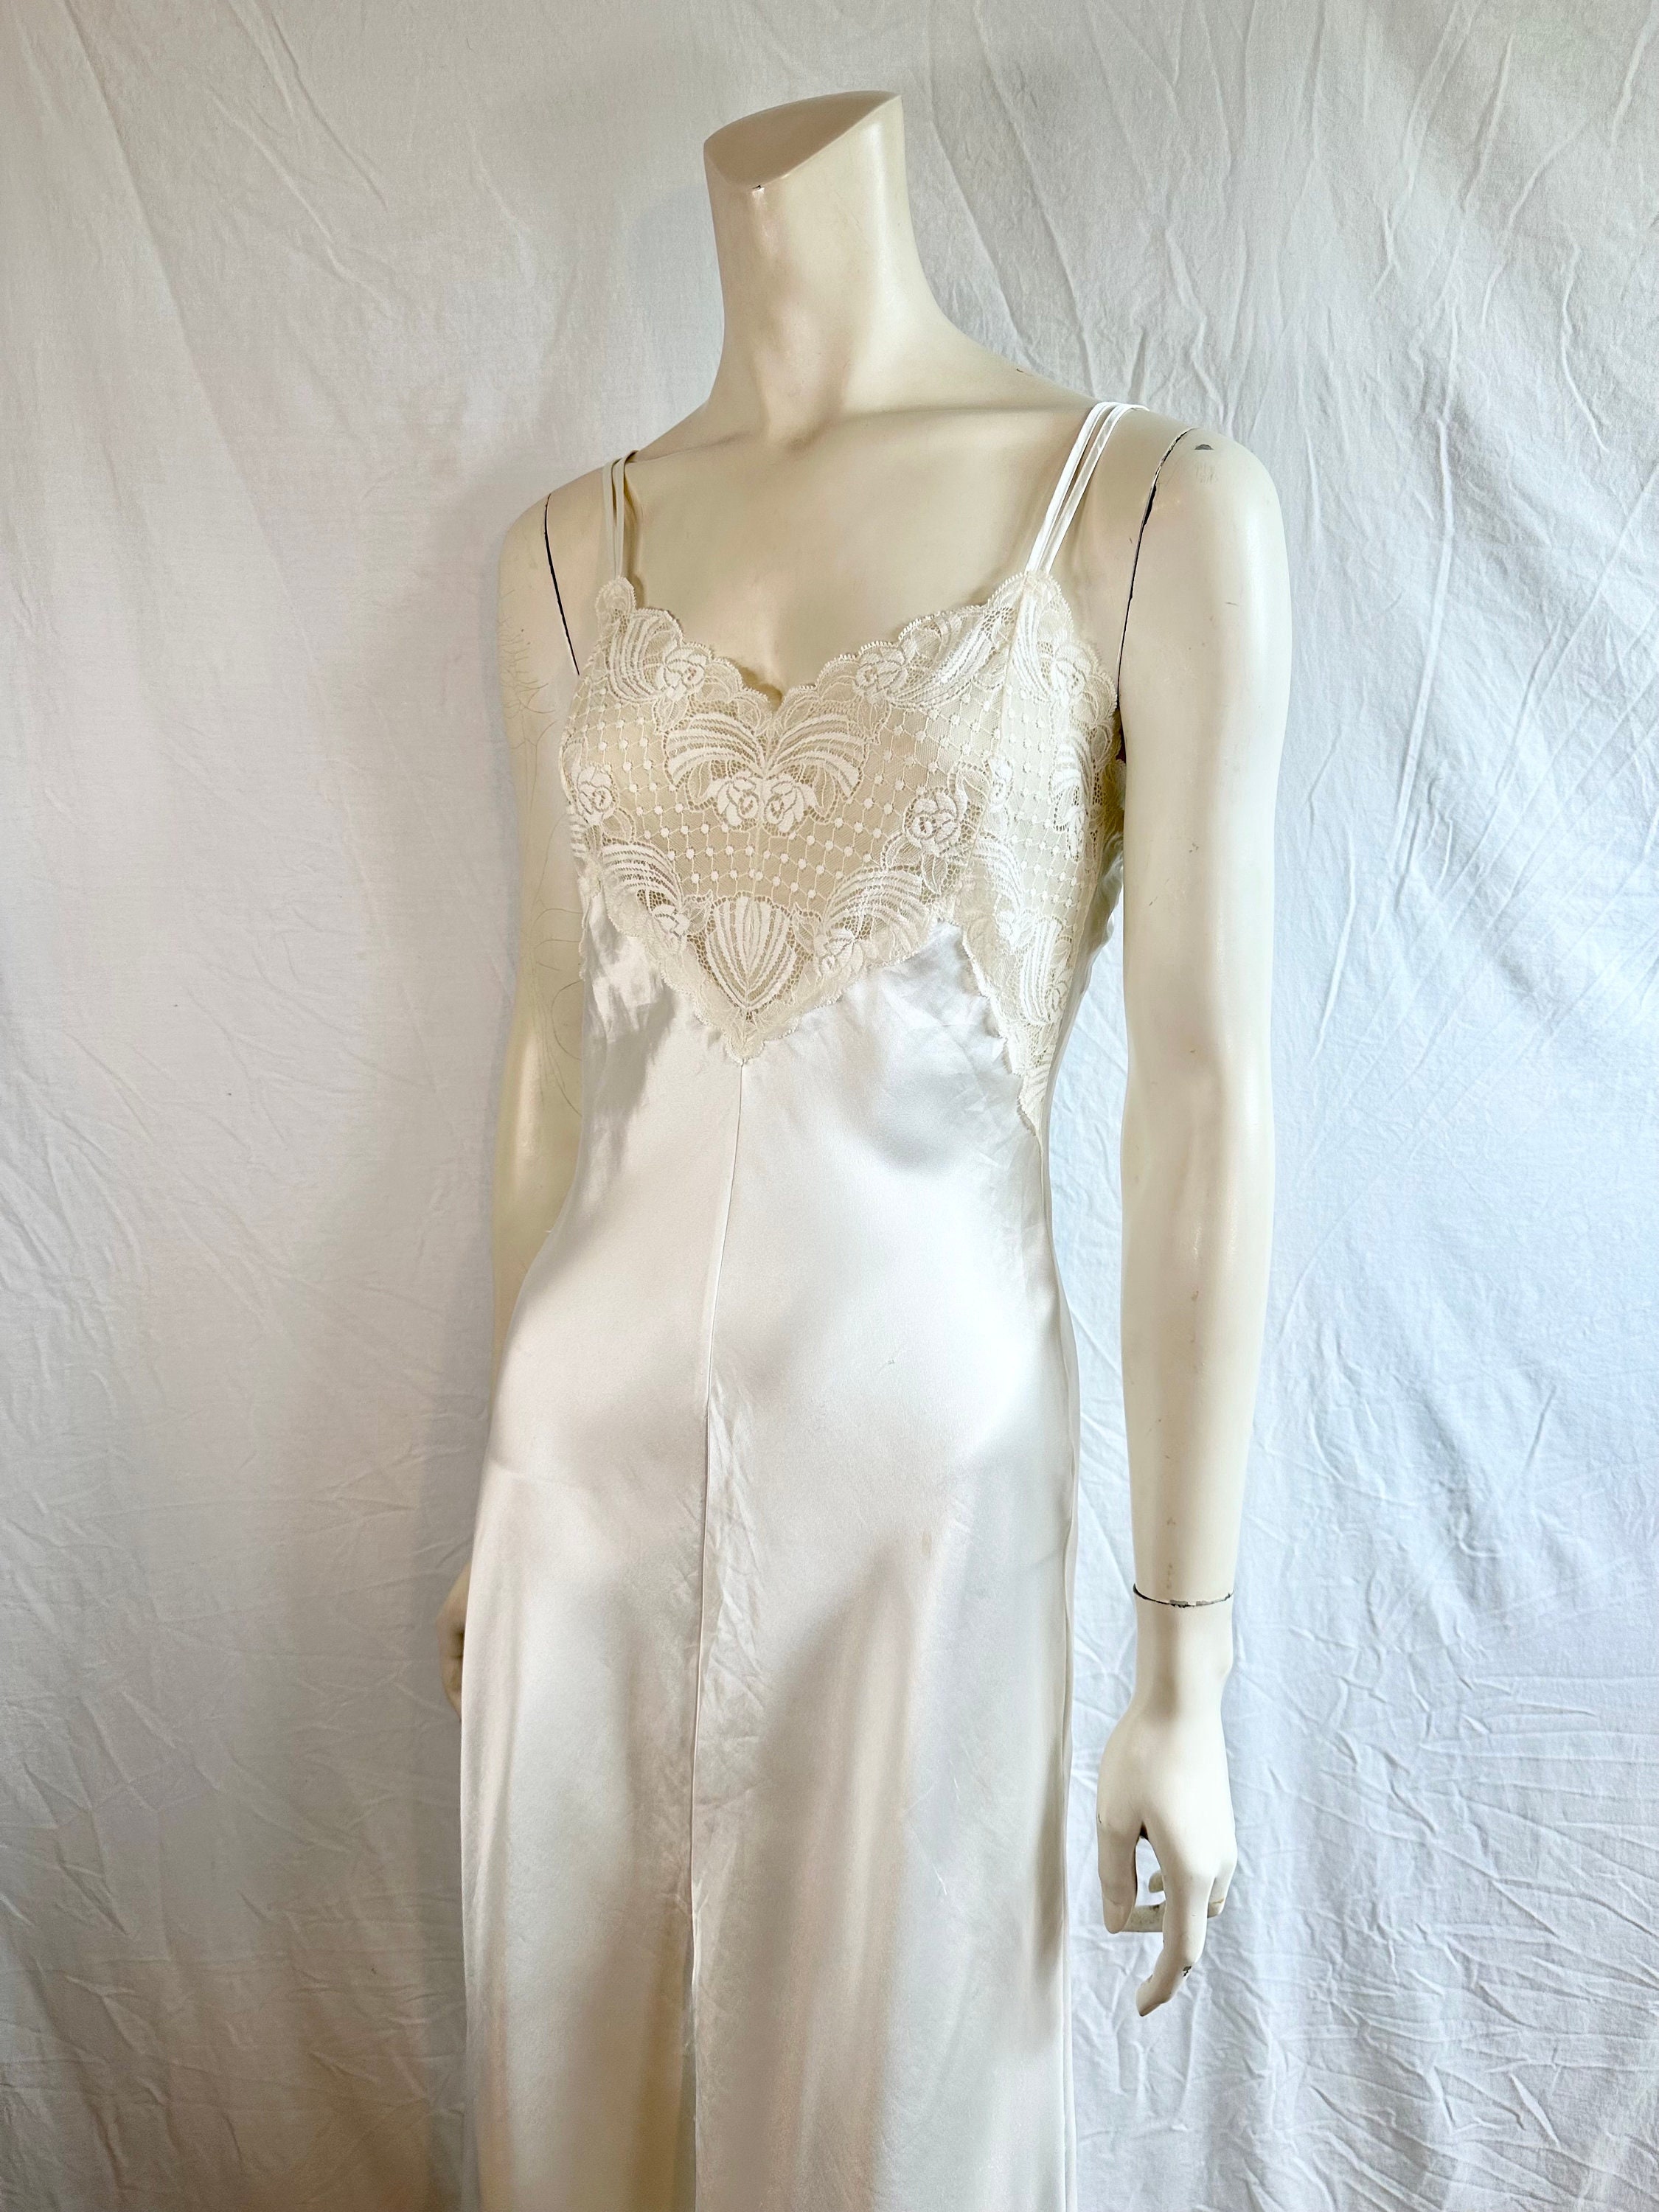 Found this Christian Dior slip dress/ night gown. Can't find any info on it  anywhere. Does anyone know anything about it? TY : r/VintageClothing